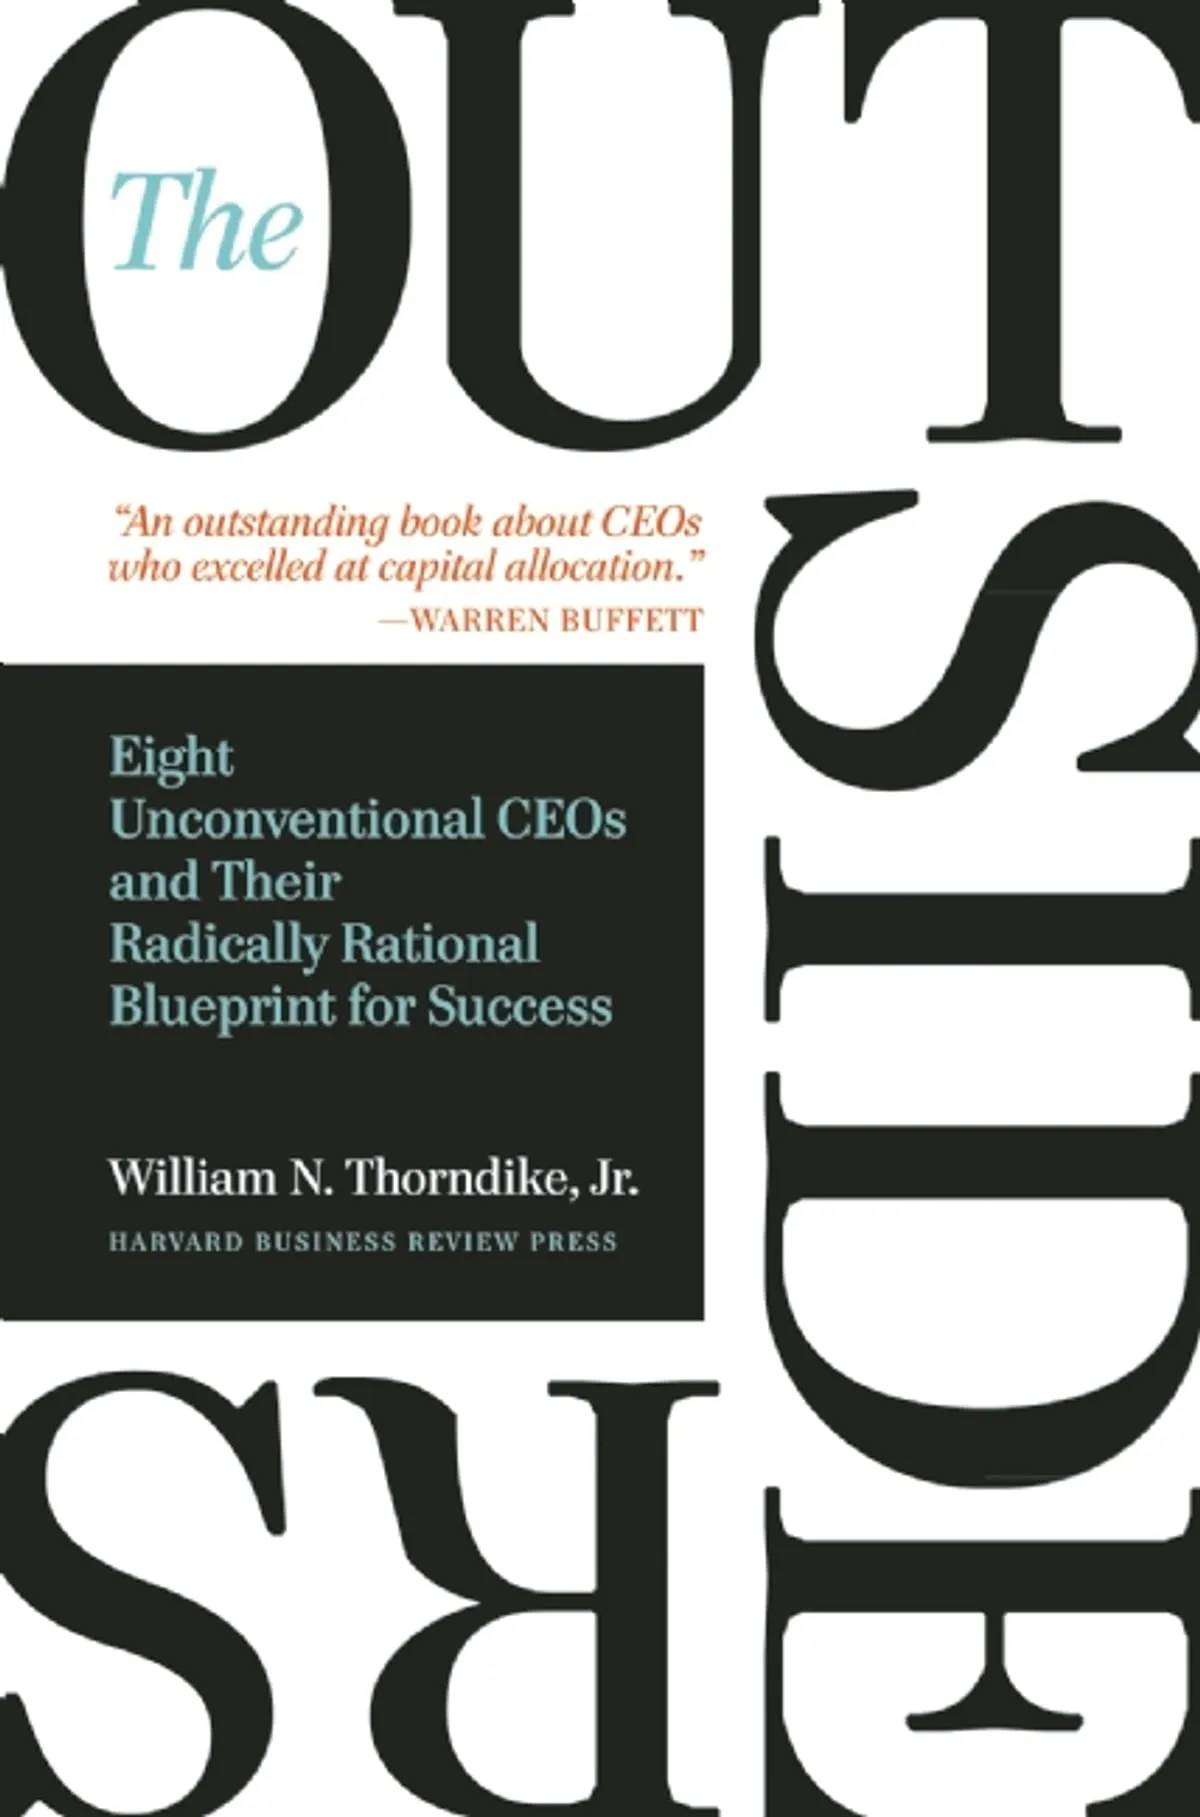 The Outsiders by William N. Thorndike